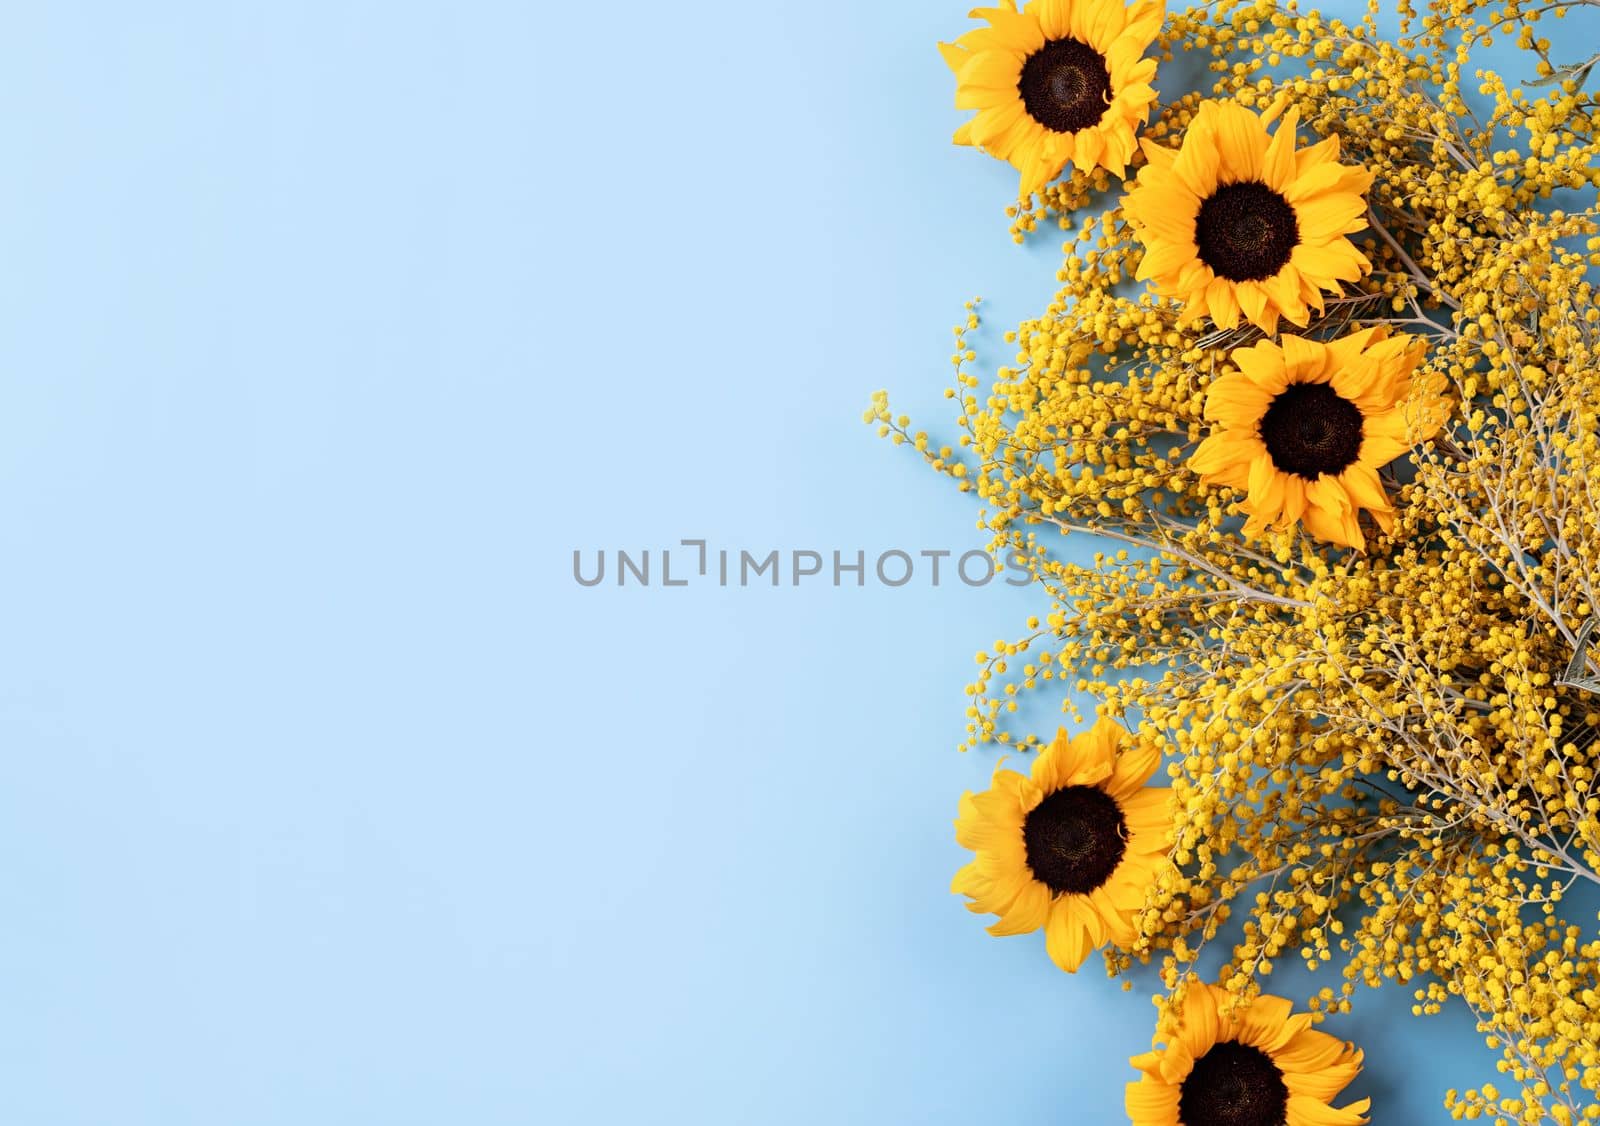 Frame of yellow mimosa flowers on blue solid bakground. Spring concept. Flat lay. Top view, banner